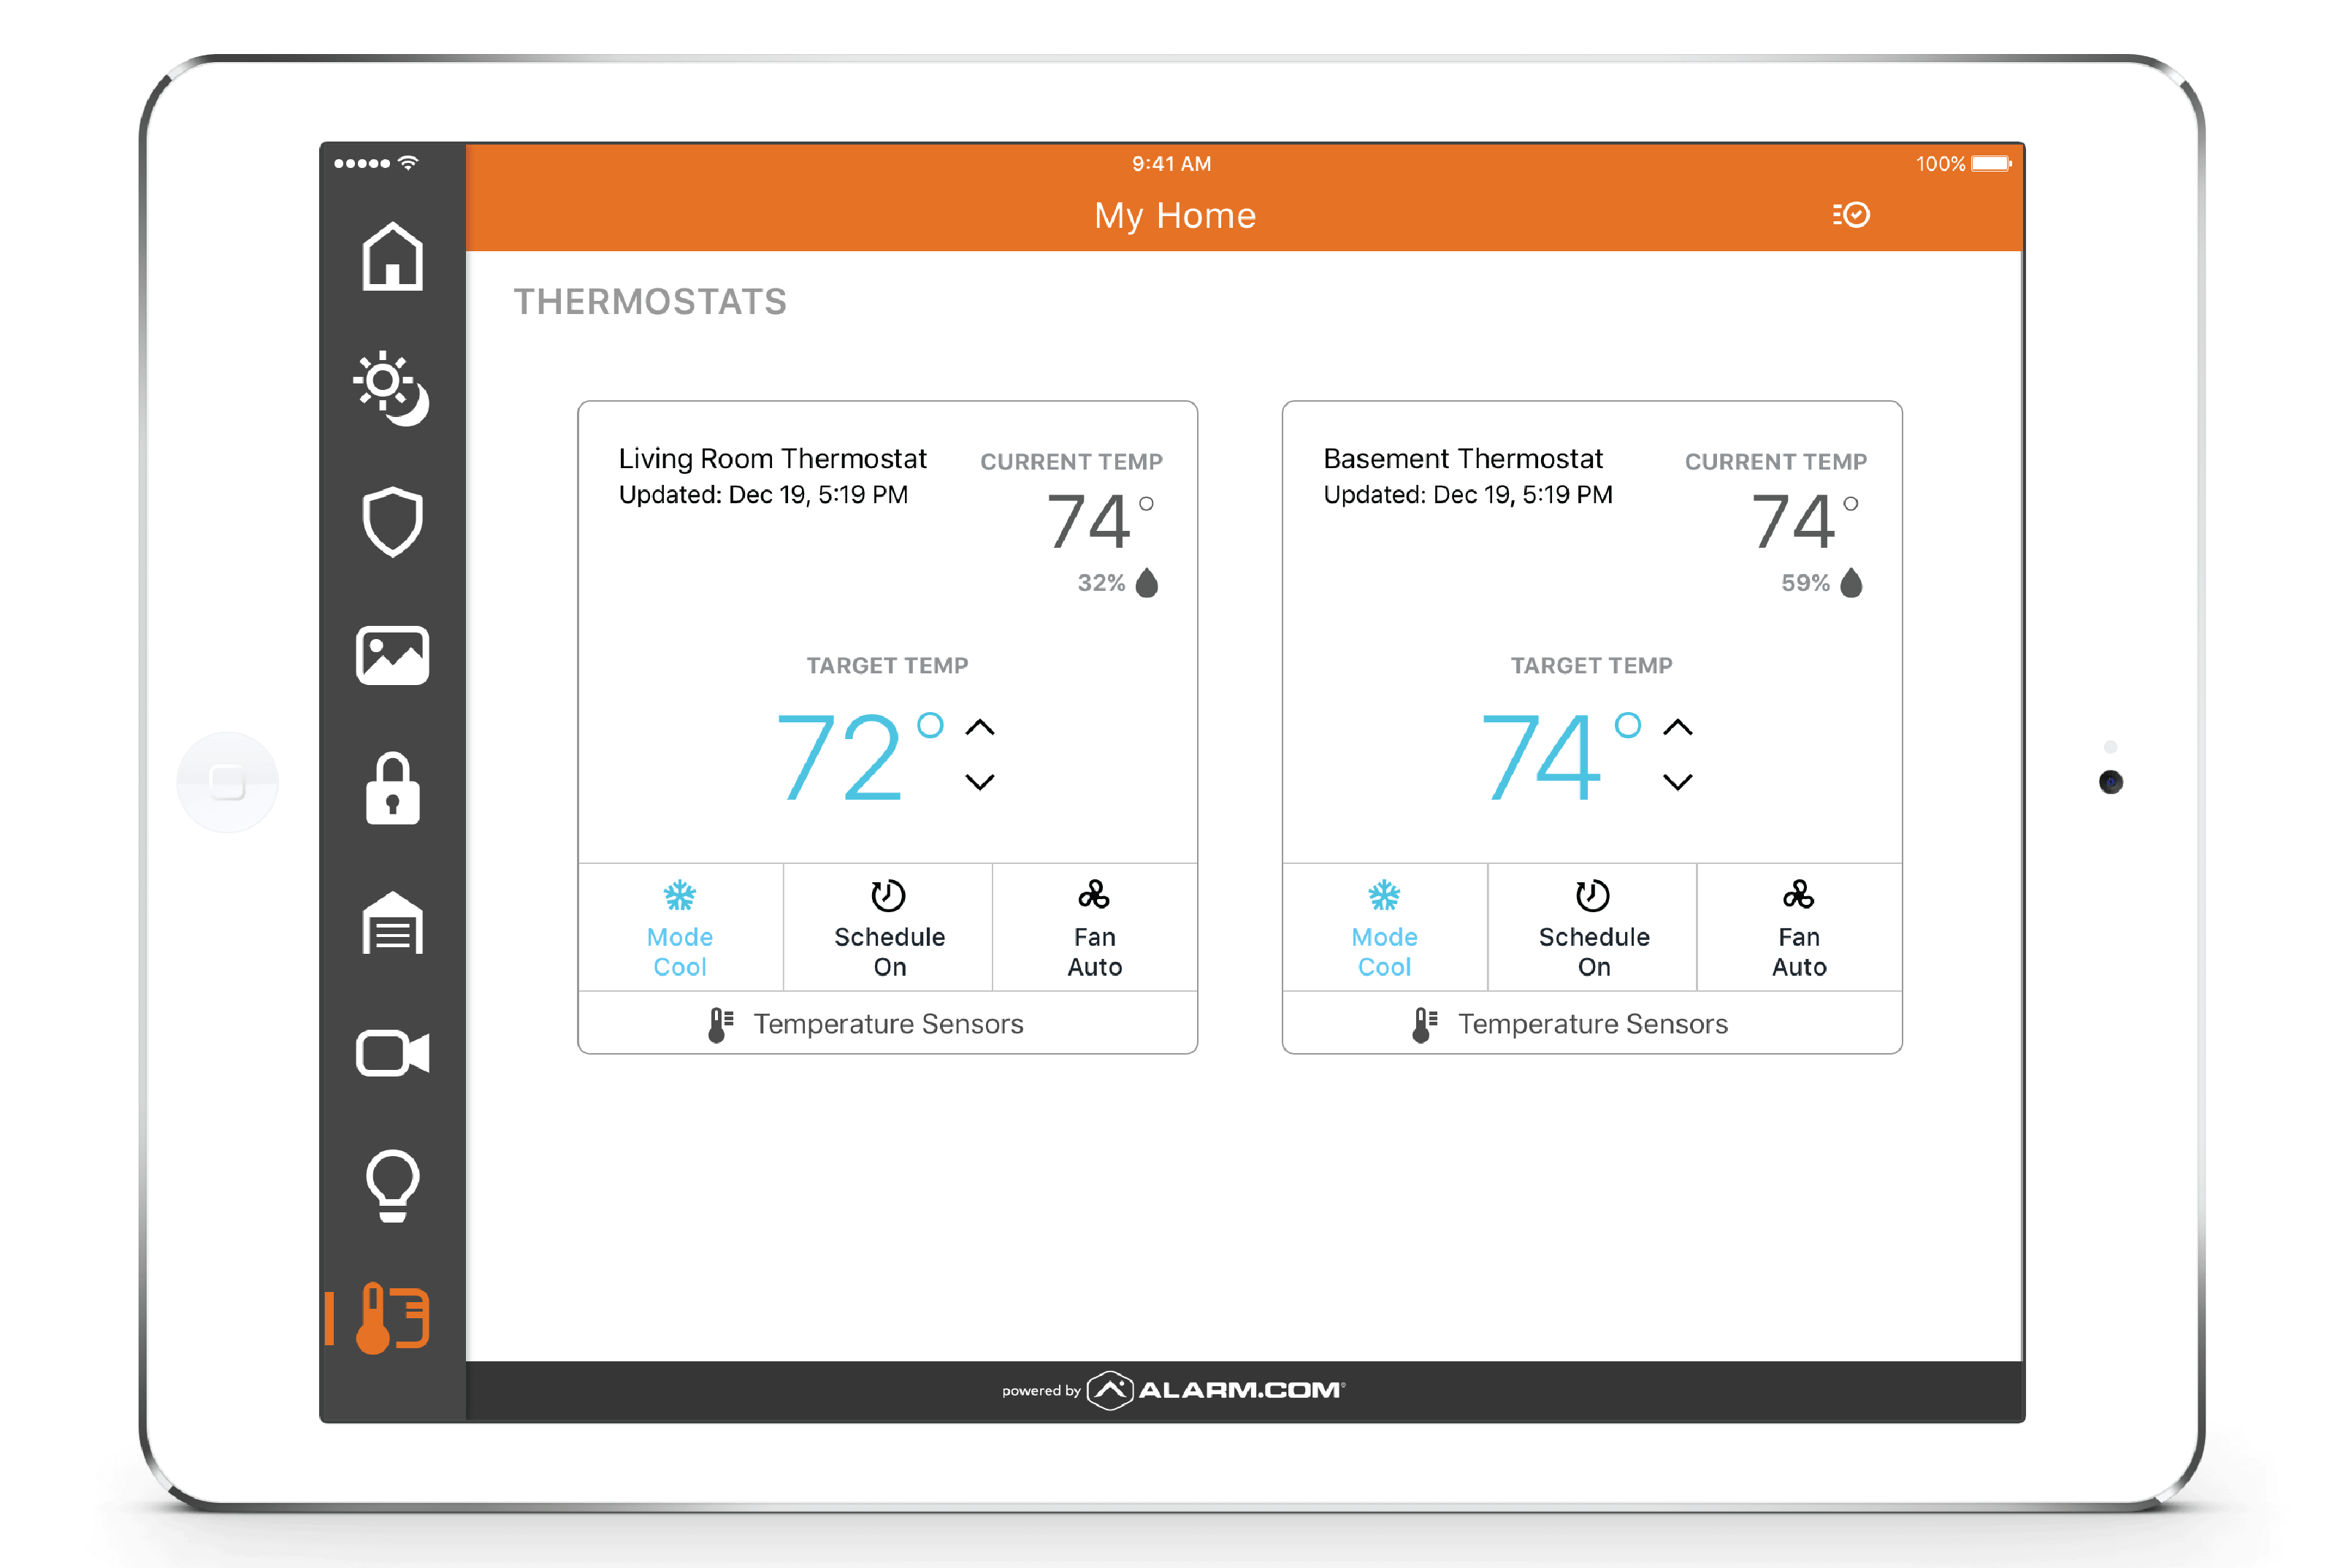 Smart thermostat controlled from anywhere